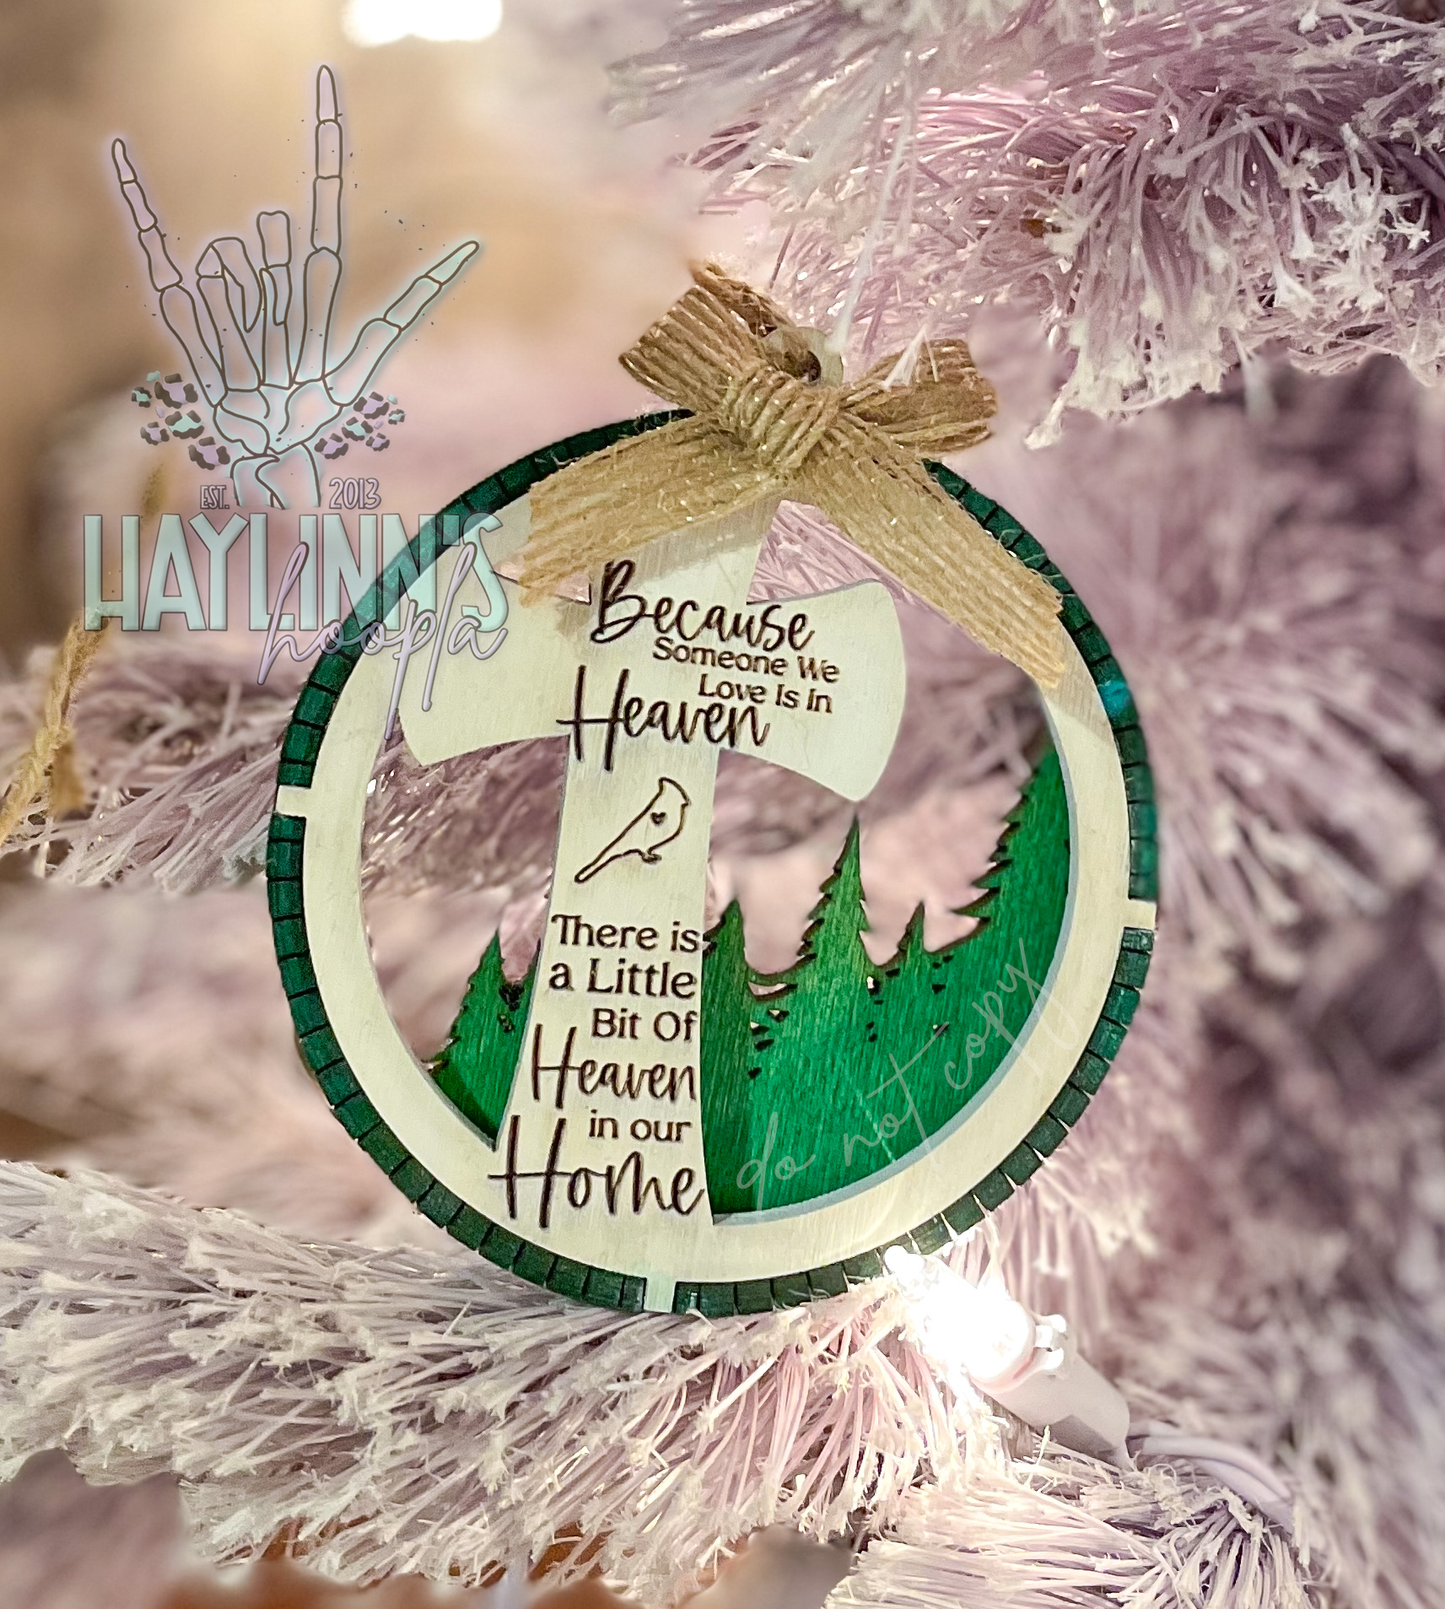 Because Someone We Love is in Heaven {3D LIVING HINGE} Wood Christmas Ornament